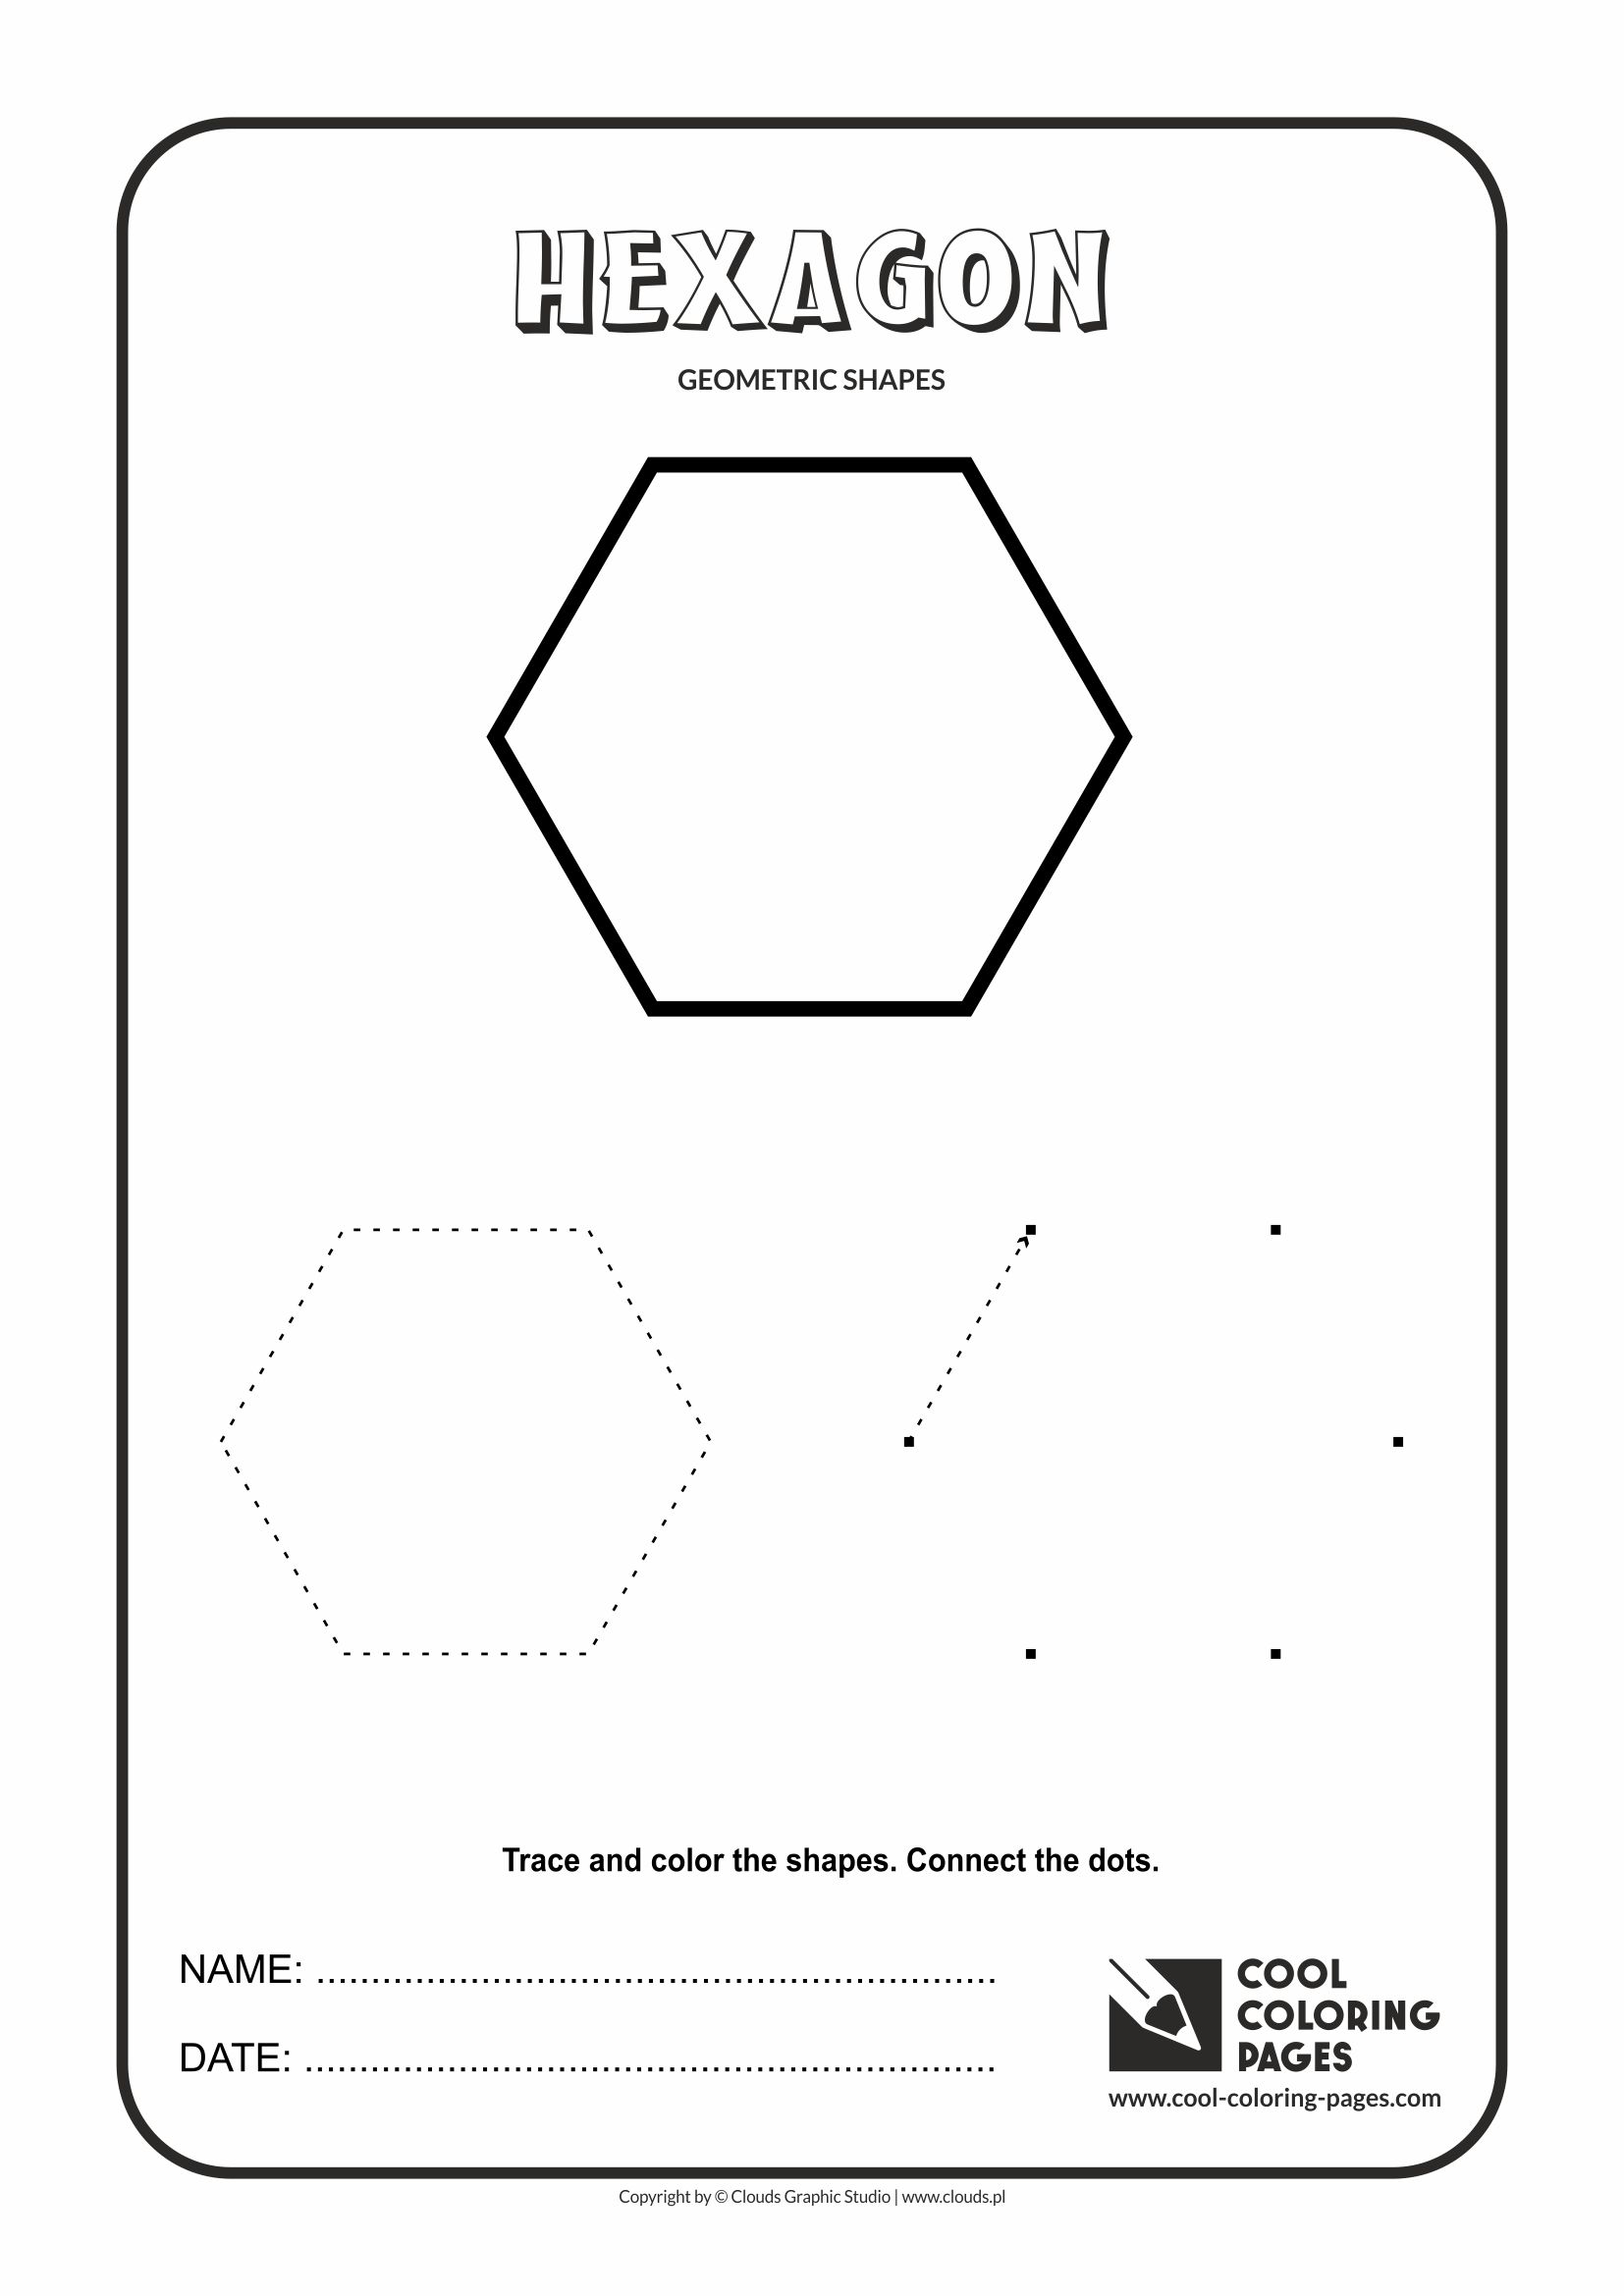 Cool Coloring Pages - Geometric shapes / Hexagon